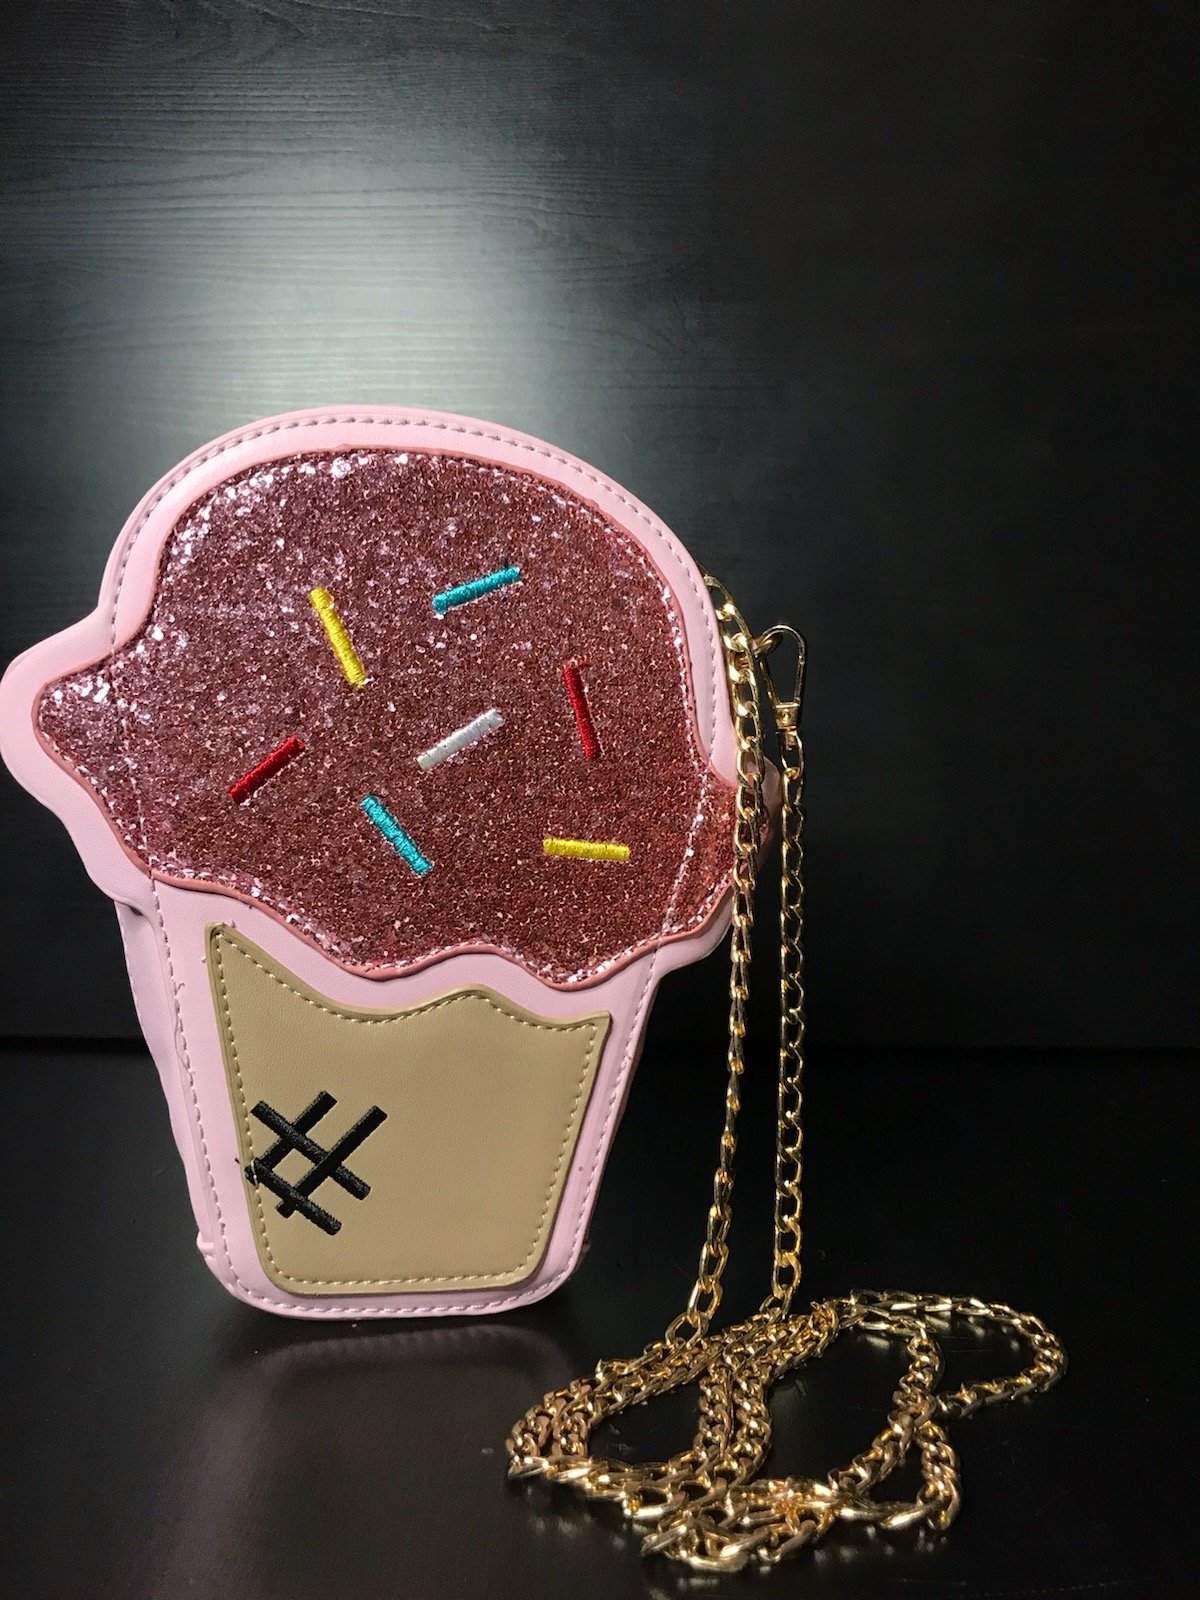 Buy Ice Cream Coin Purse Online in India - Etsy